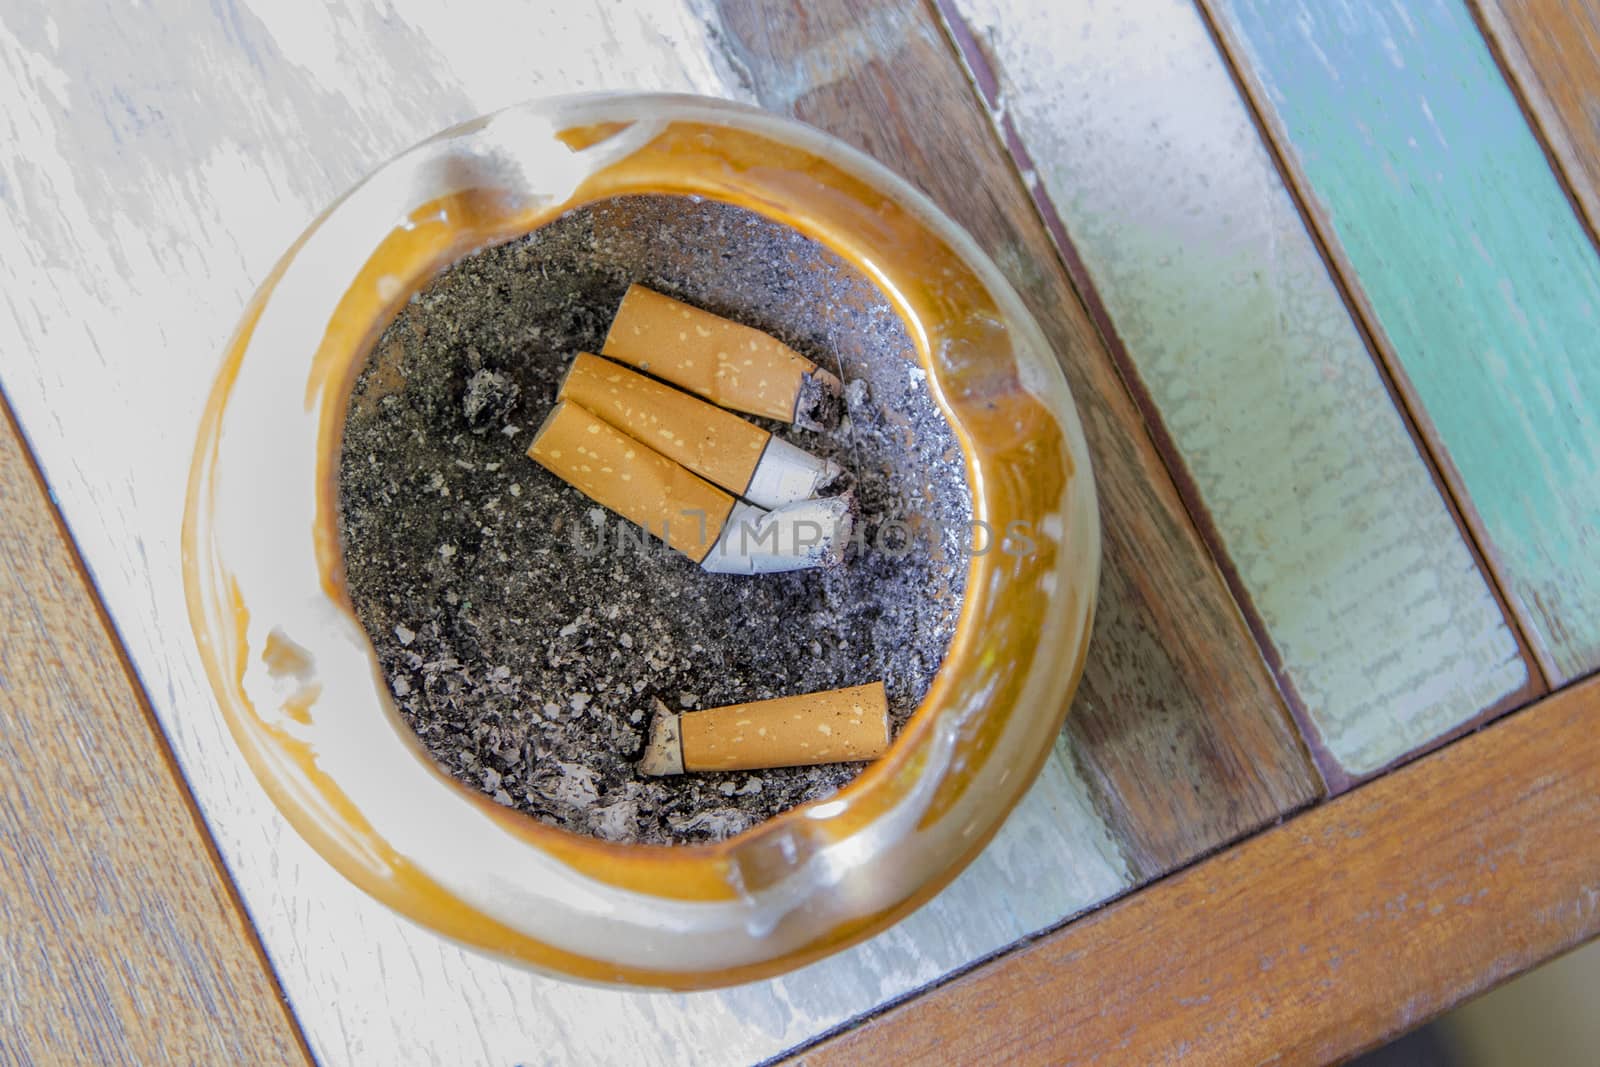 The top of the ashtray placed on the table. by TakerWalker